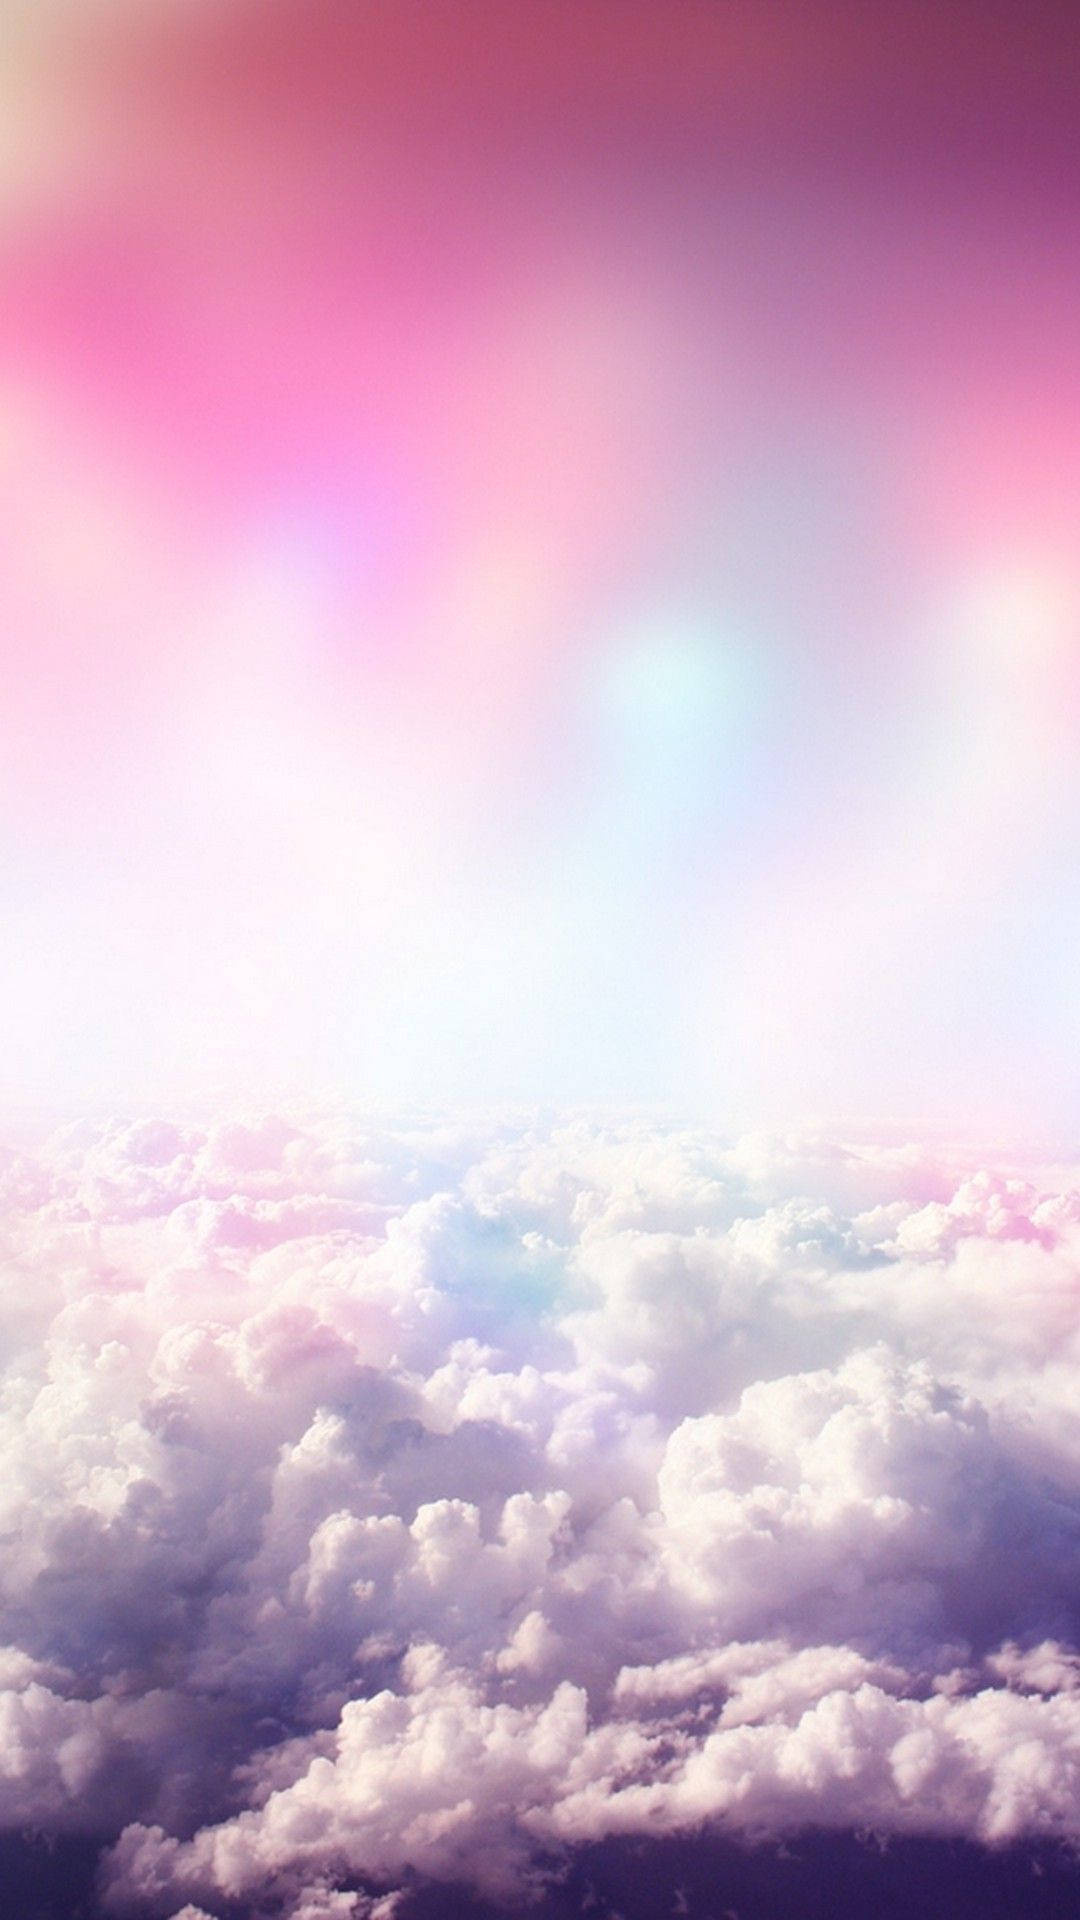 A girly pink sky with fluffy, dreamy clouds Wallpaper